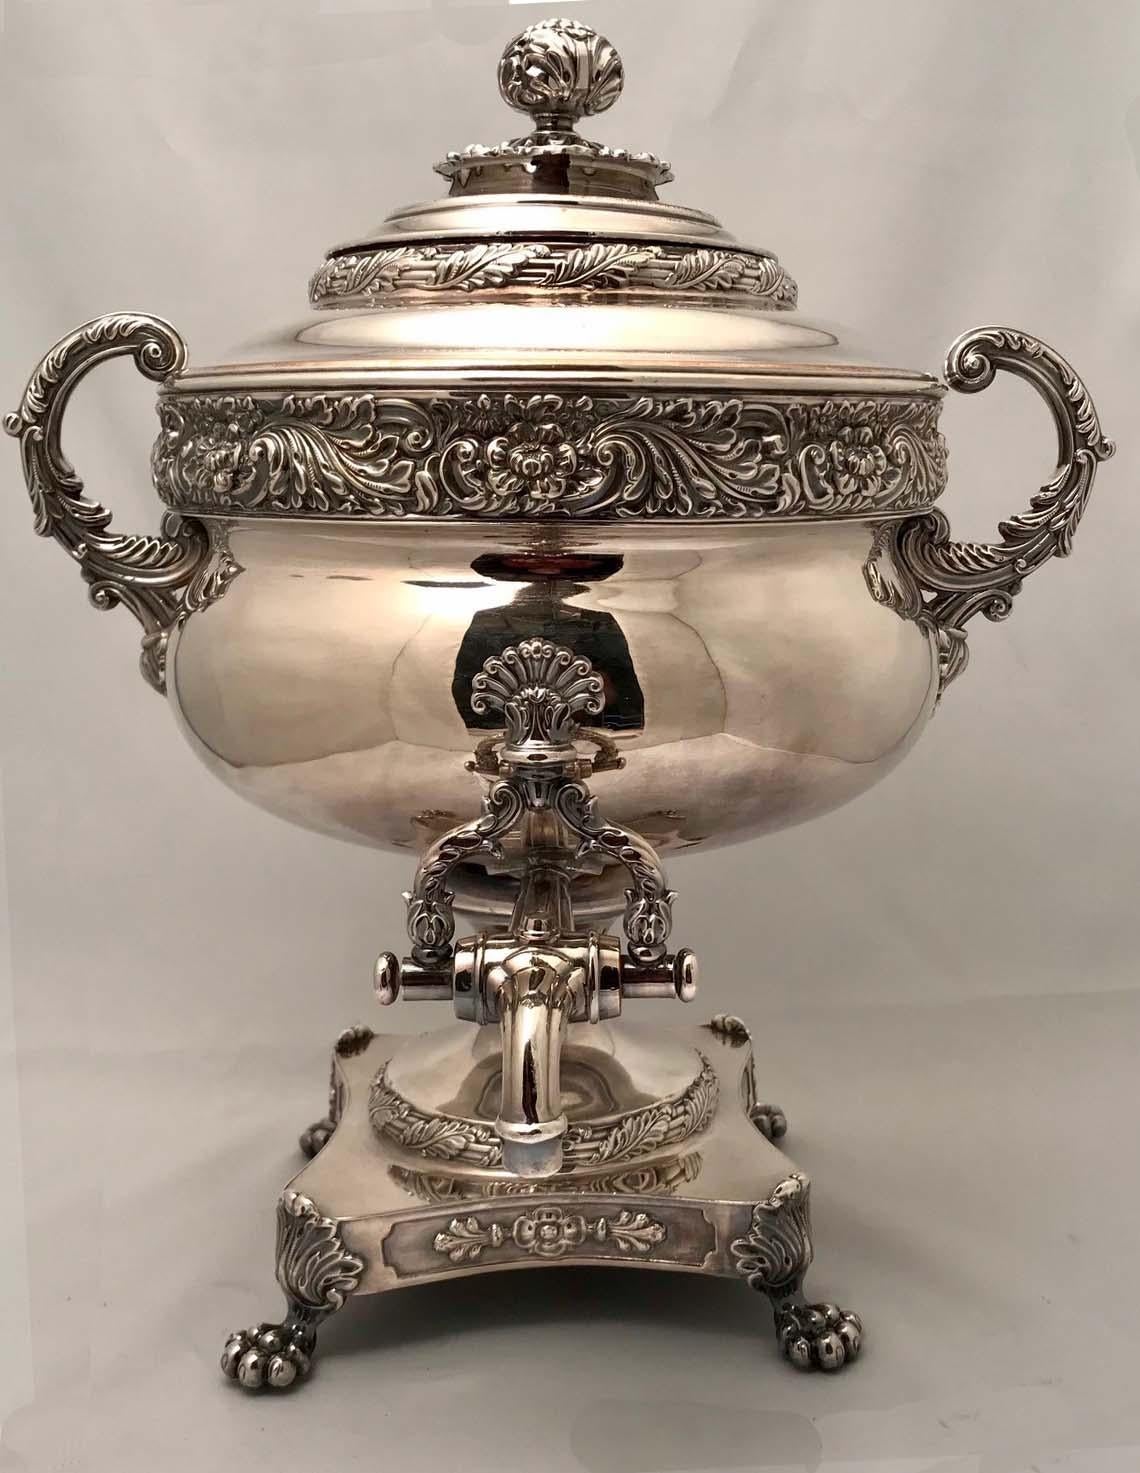 This is a splendid example of the form. that breaks away from  Neo-Classical plainness into exuberant and lively ornament. The two handled urn is banded with leaves and acanthus. The shaped rectangular base is supported by shell and lion-paw feet.